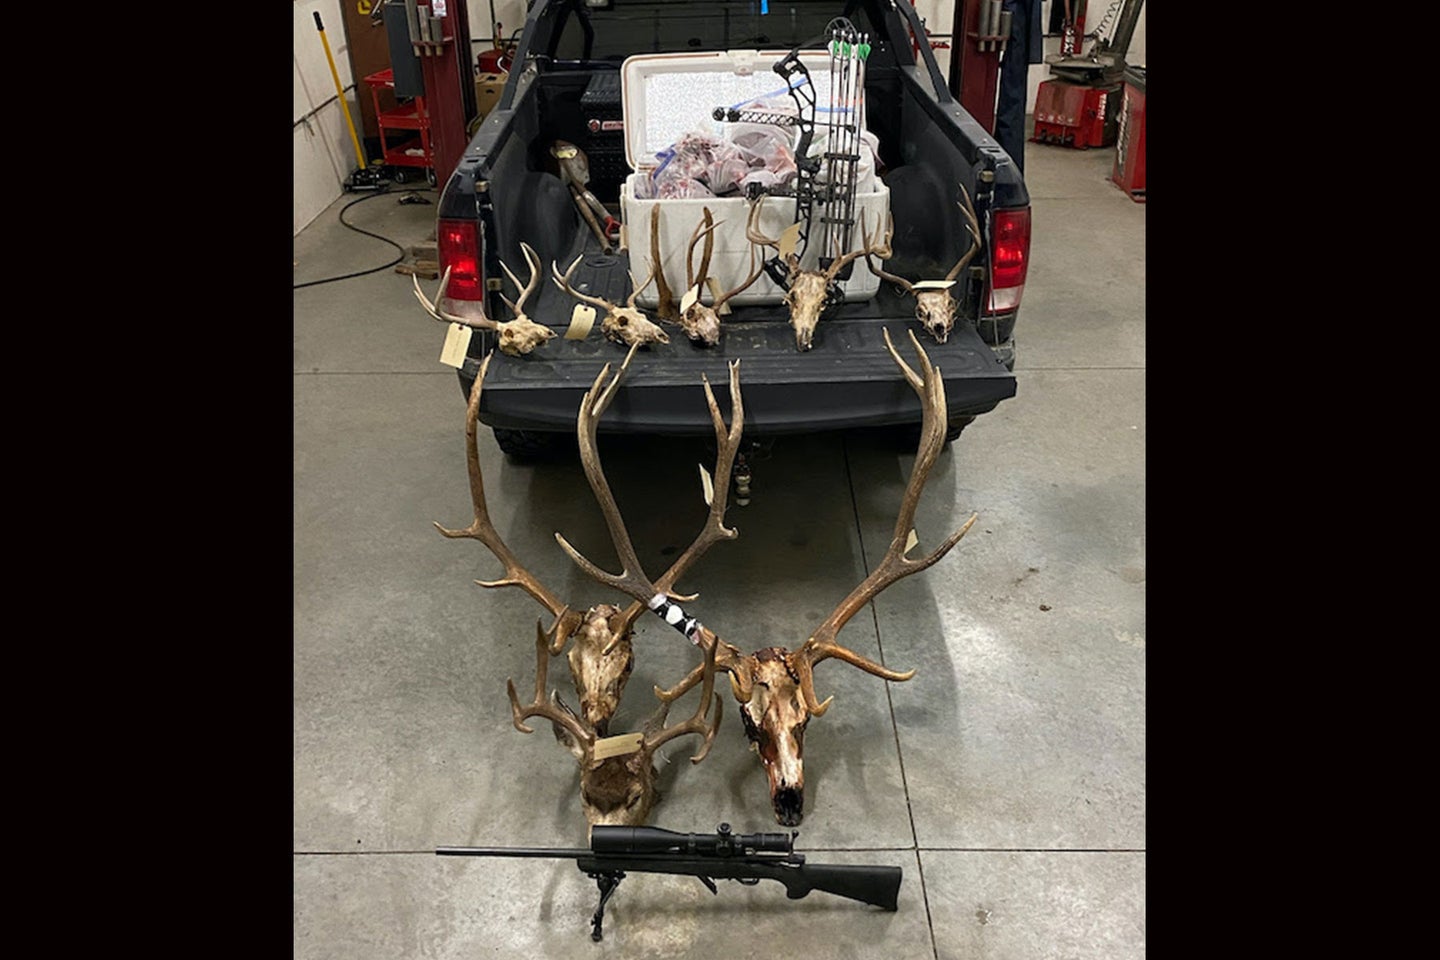 Agents with the Oregon Department of Fish and Wildlife confiscated two trophy bull elk skulls and six deer heads from Walker Erickson's home during a 2021 raid. 